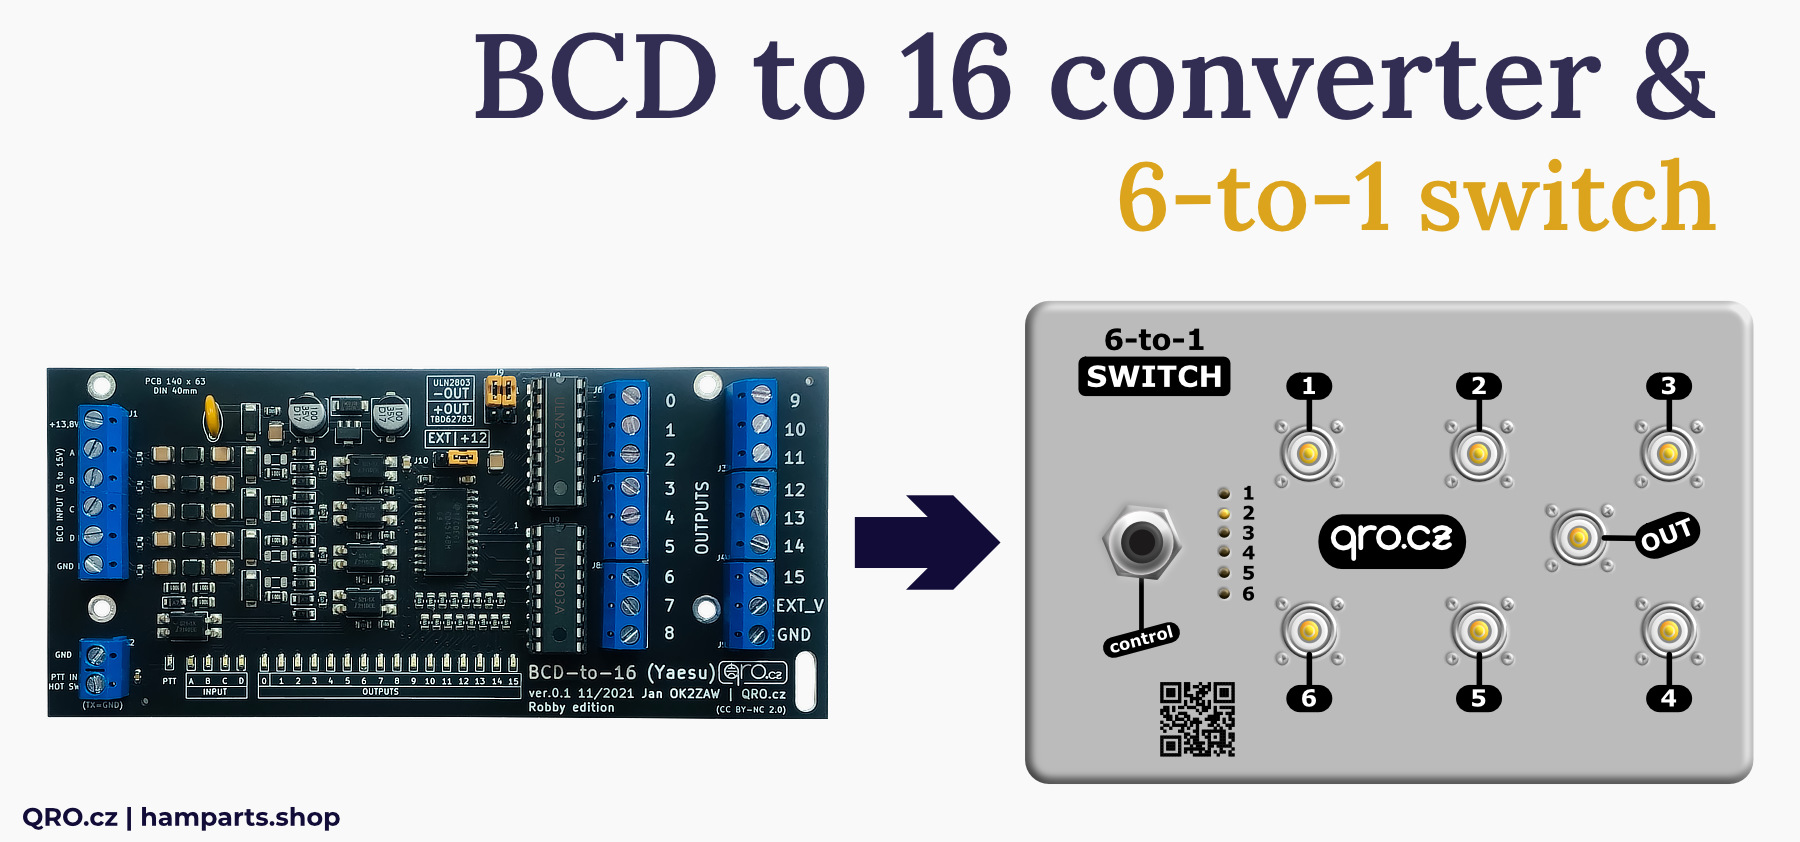 BCD to 16 converter with 6 to 1 antenna switch by qro.cz hamparts.shop